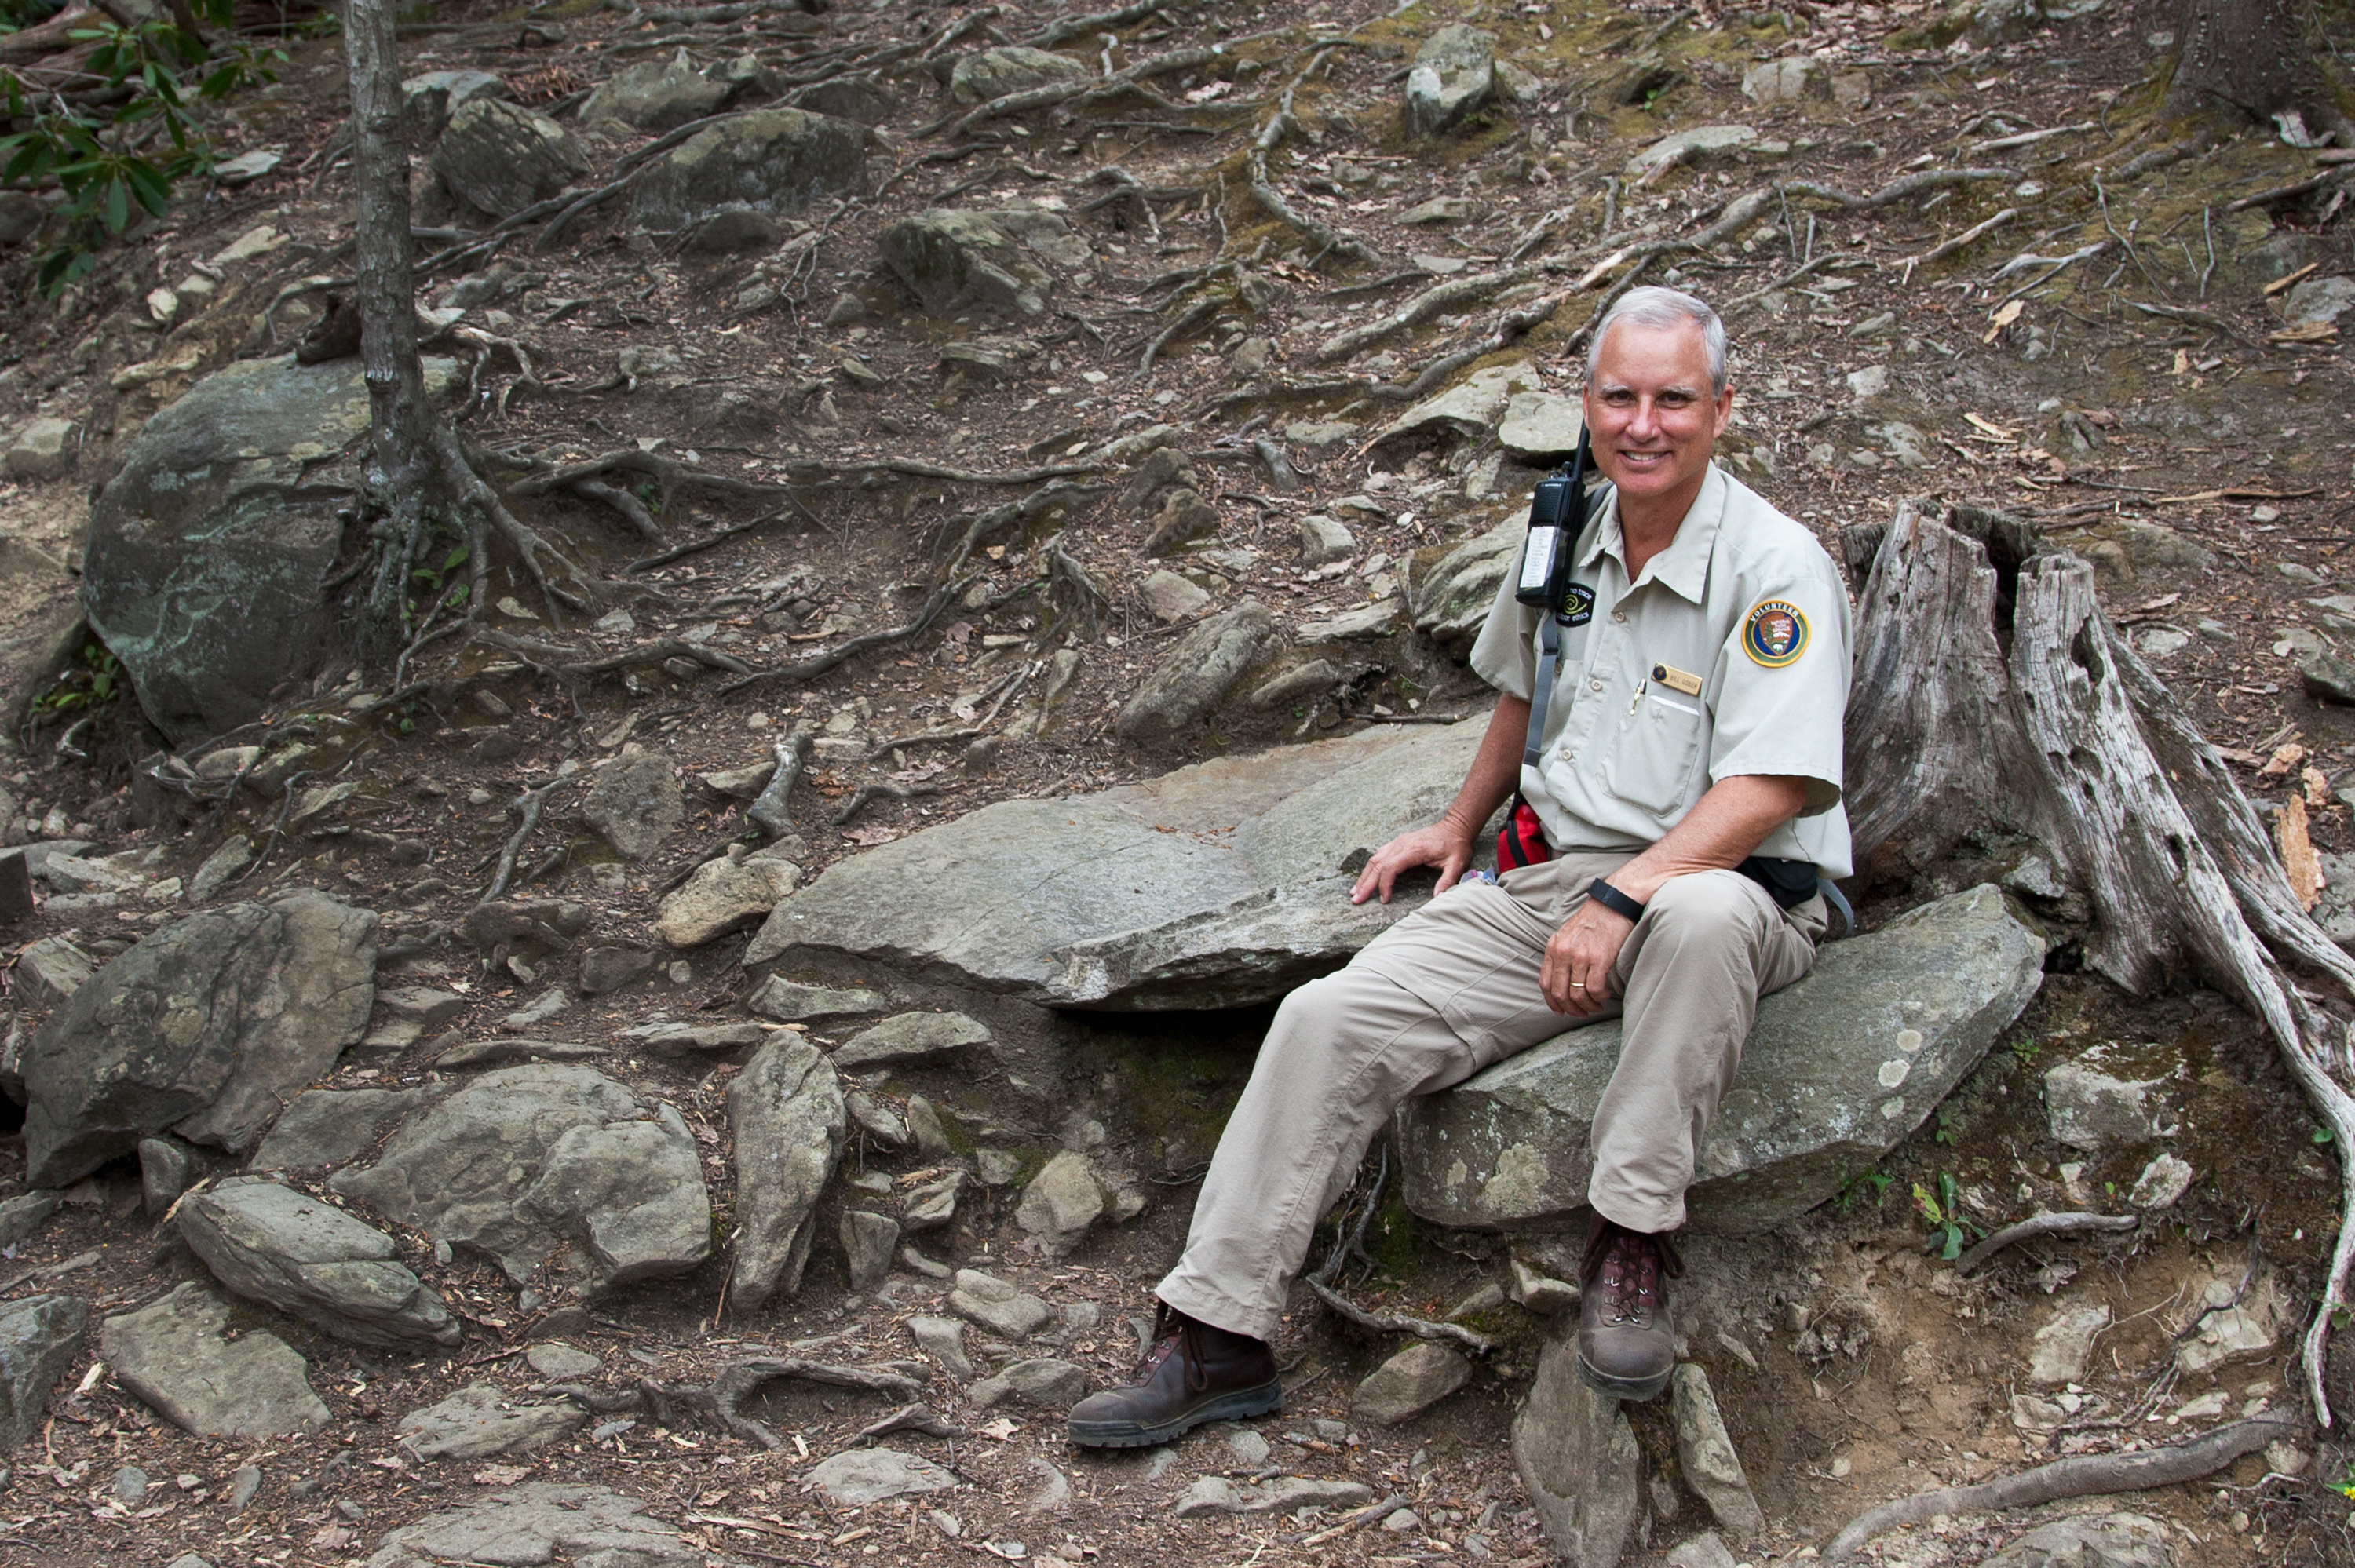 Bill Gober started volunteering as a trail rover at Great Smoky Mountains National Park 4 years ago after he lost his job. He helps monitor visitors and pick up garbage from the trails.